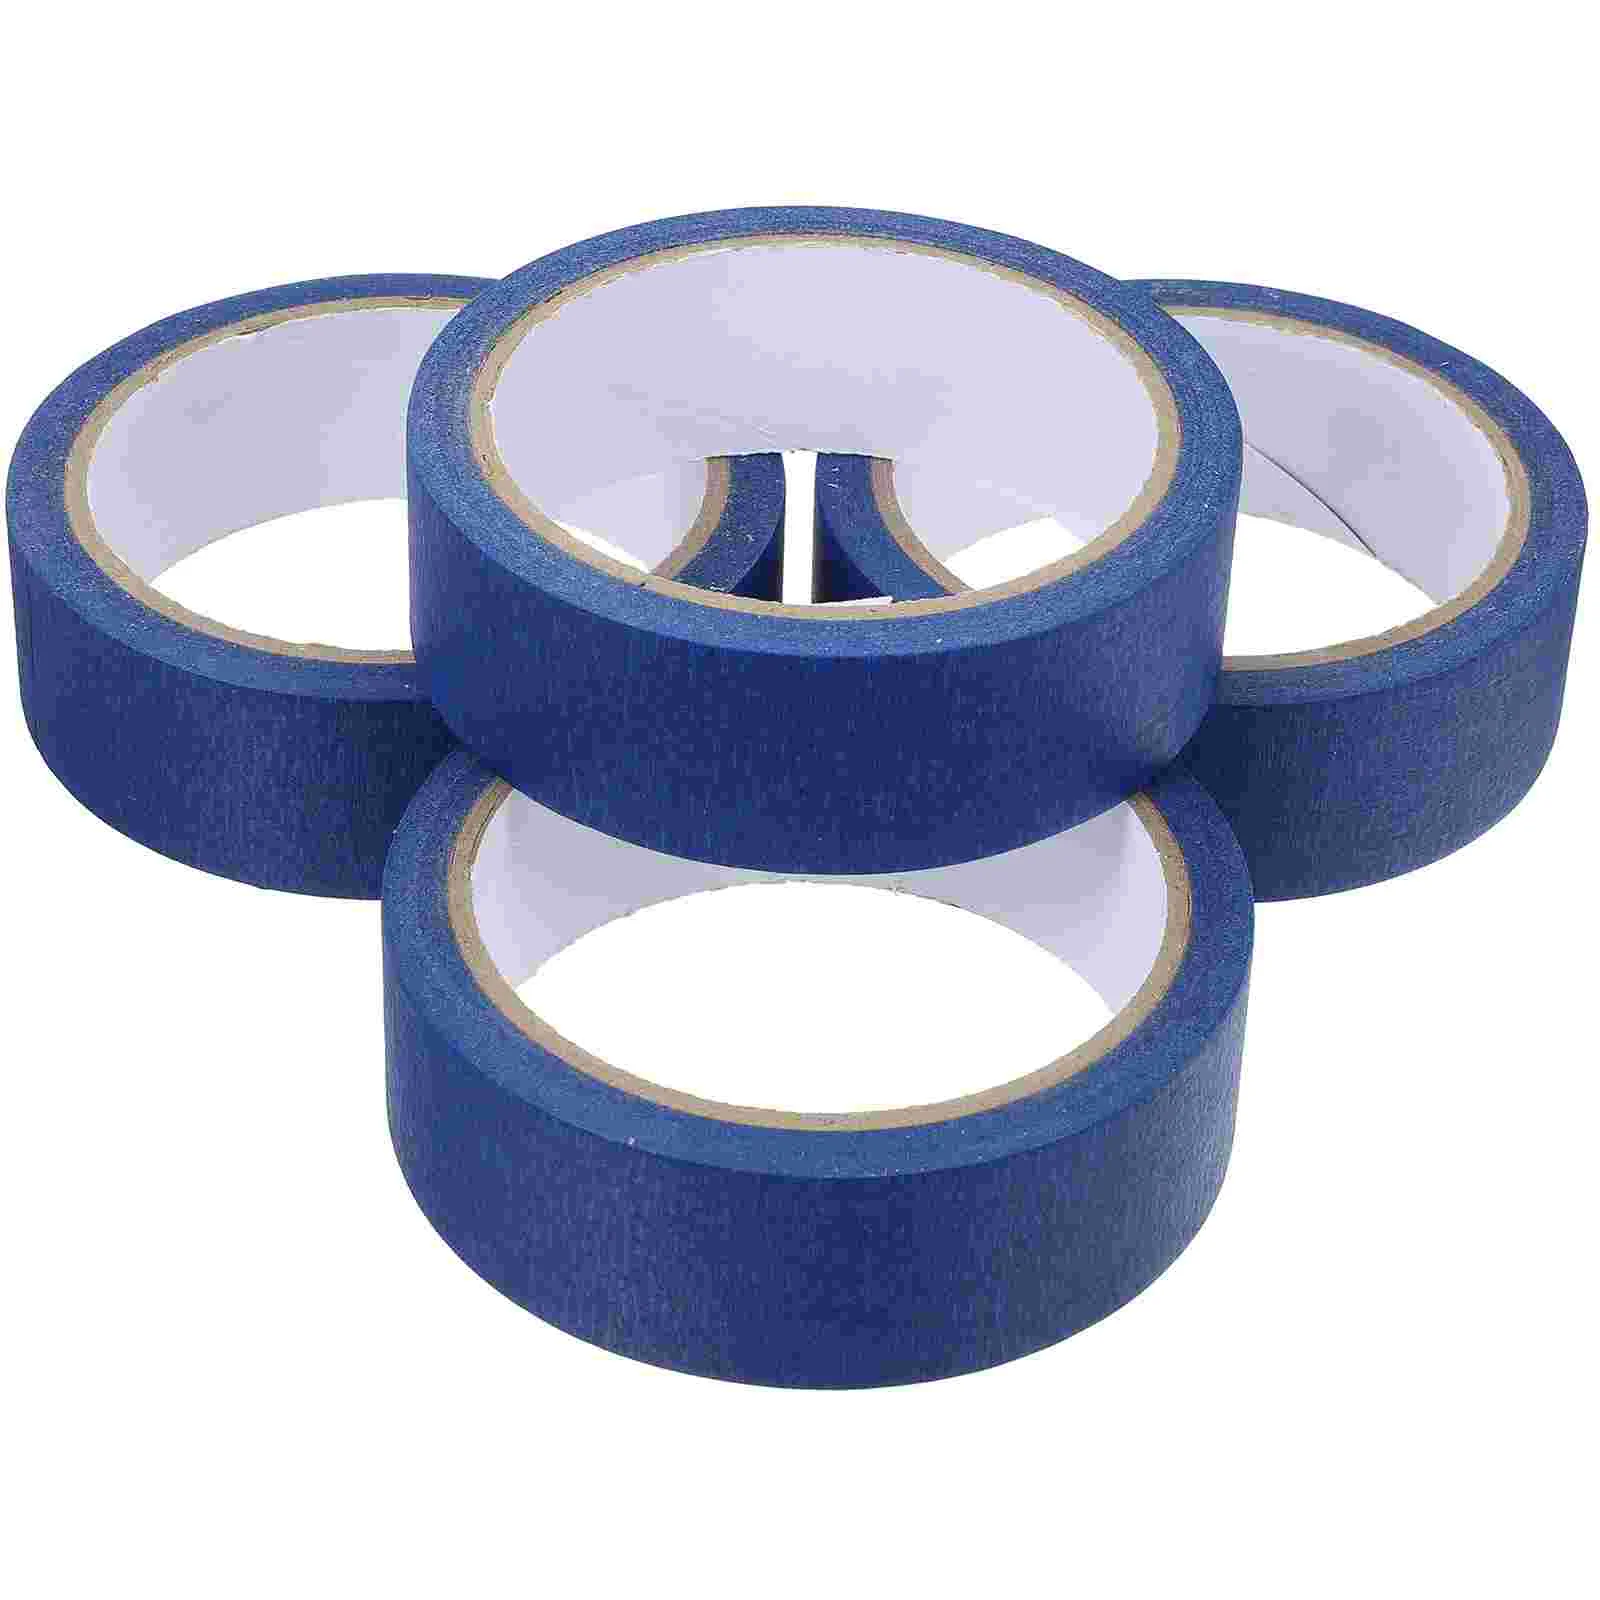 Blue Masking Tape DIY Tapes Crafts Adhesive Paint for Painting Painter Duct 1pc lot 15mm 10m solar term summer solstice lotus washi tape masking tapes decorative stickers diy stationery school supply